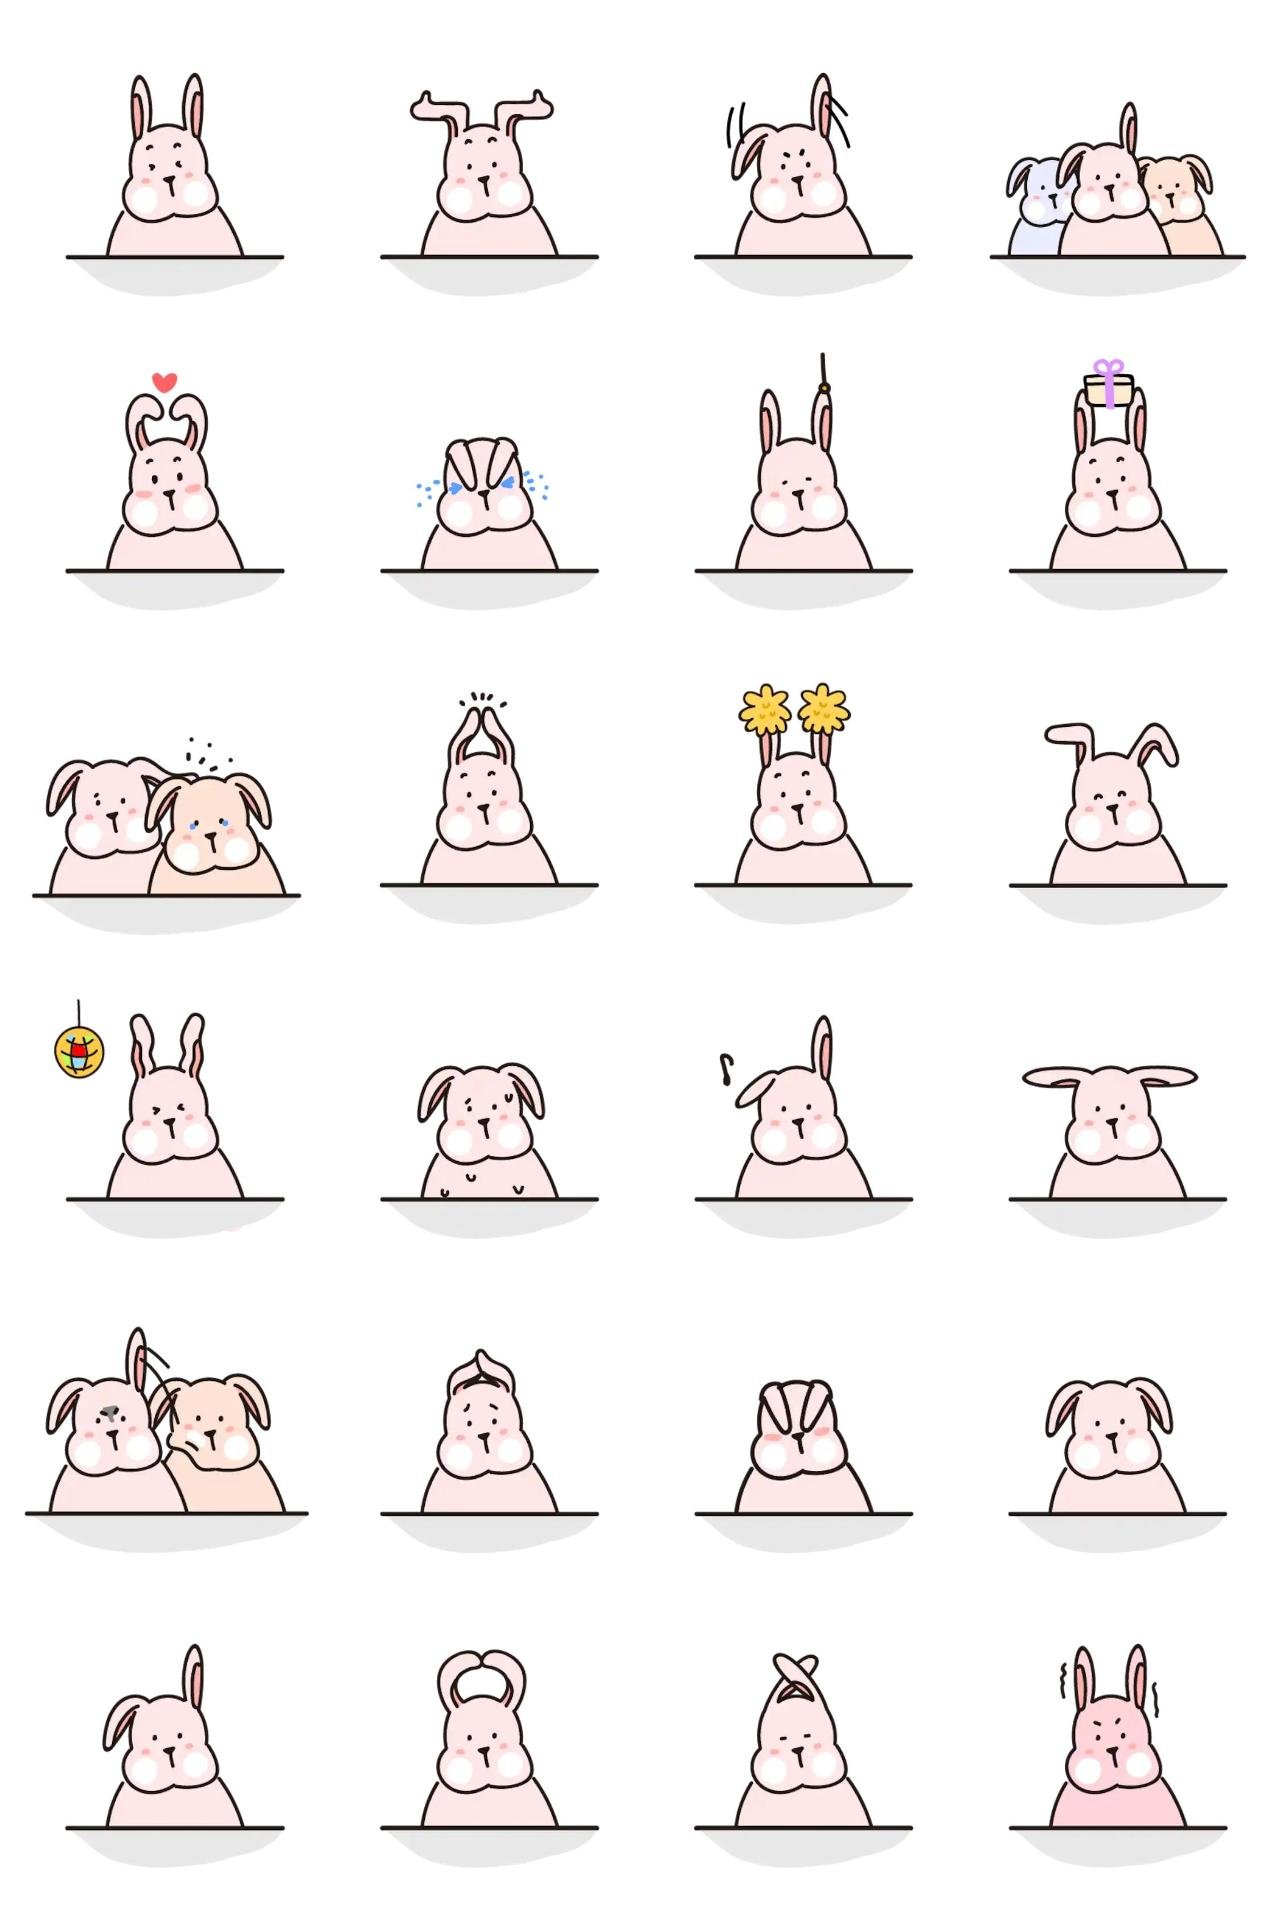 Flexible ear rabbit Animals,Etc. sticker pack for Whatsapp, Telegram, Signal, and others chatting and message apps